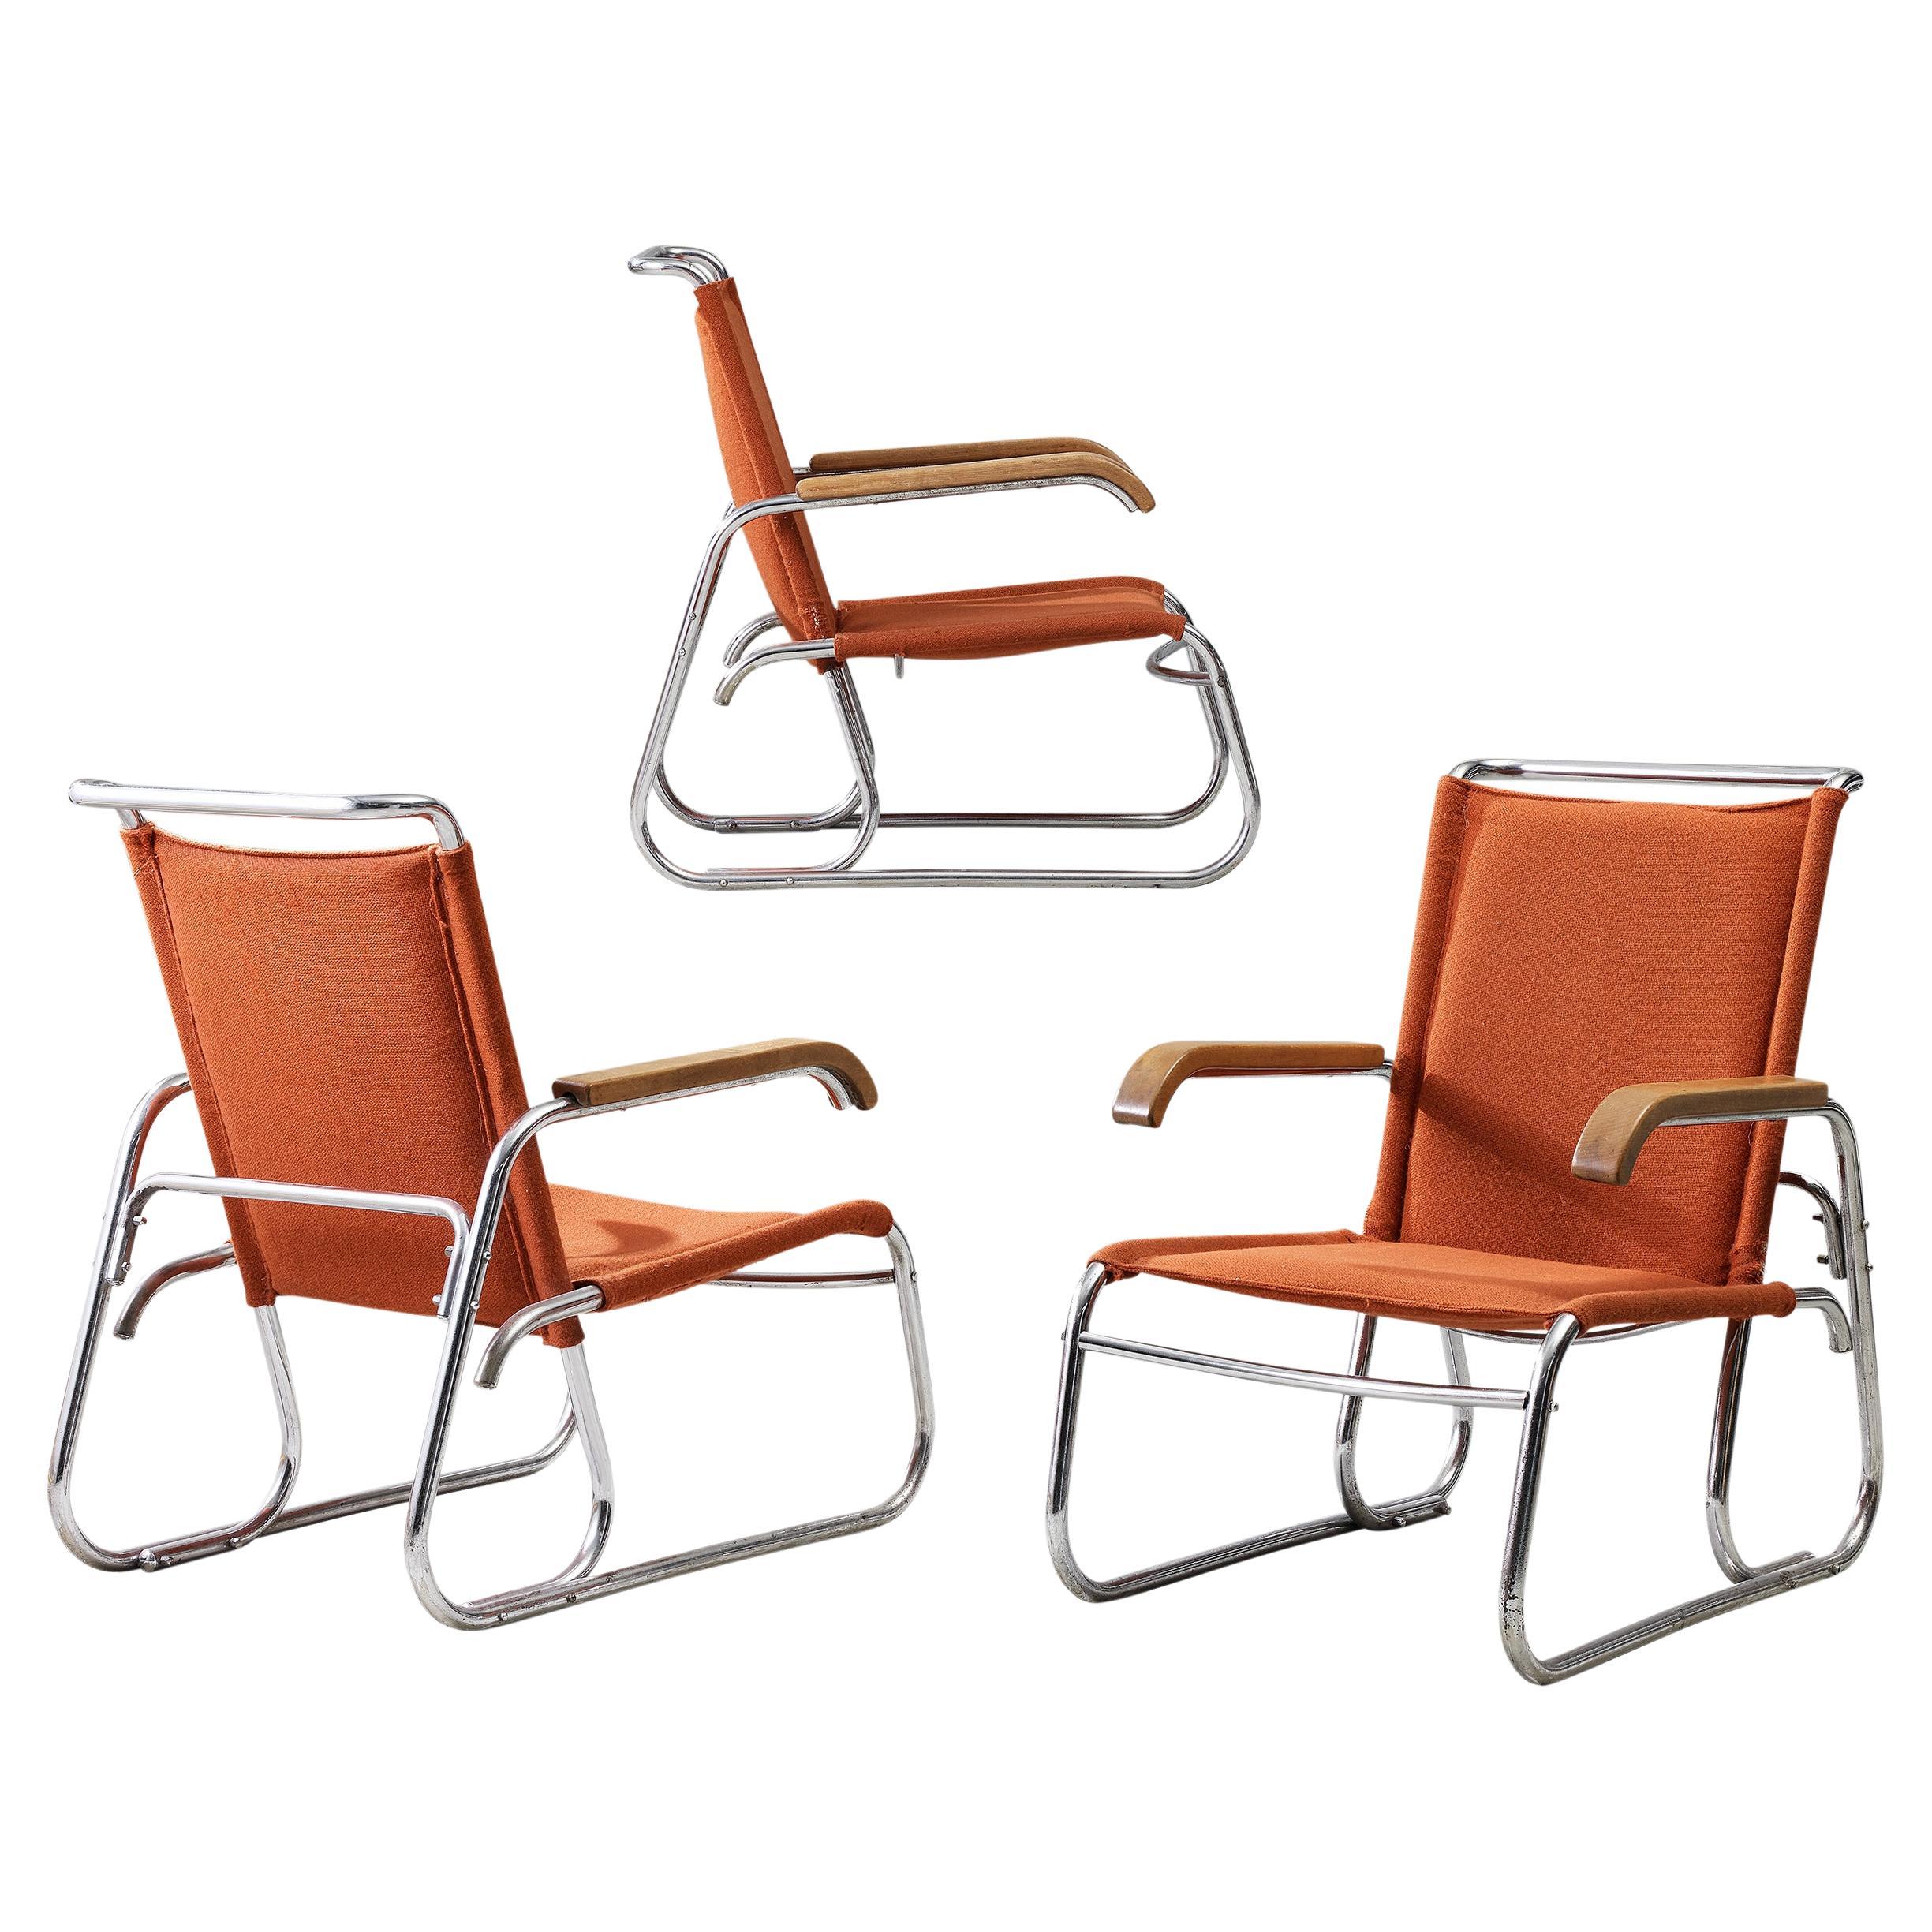 Dutch Modernist Tubular Steel Armchairs in the manner of Marcel Breuer For Sale